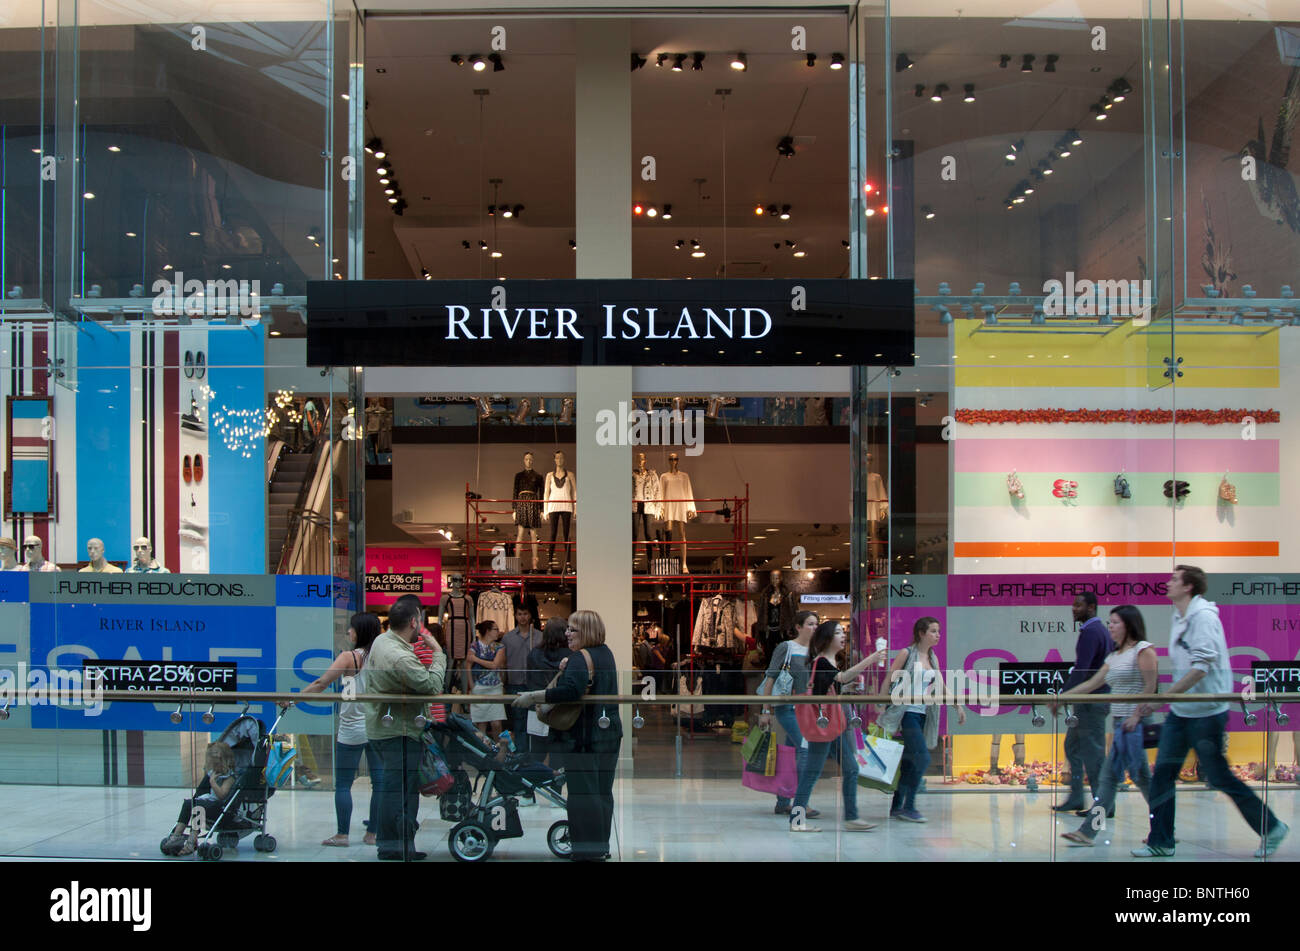 River Island Store - Westfield Shopping Centre - London Stockfoto